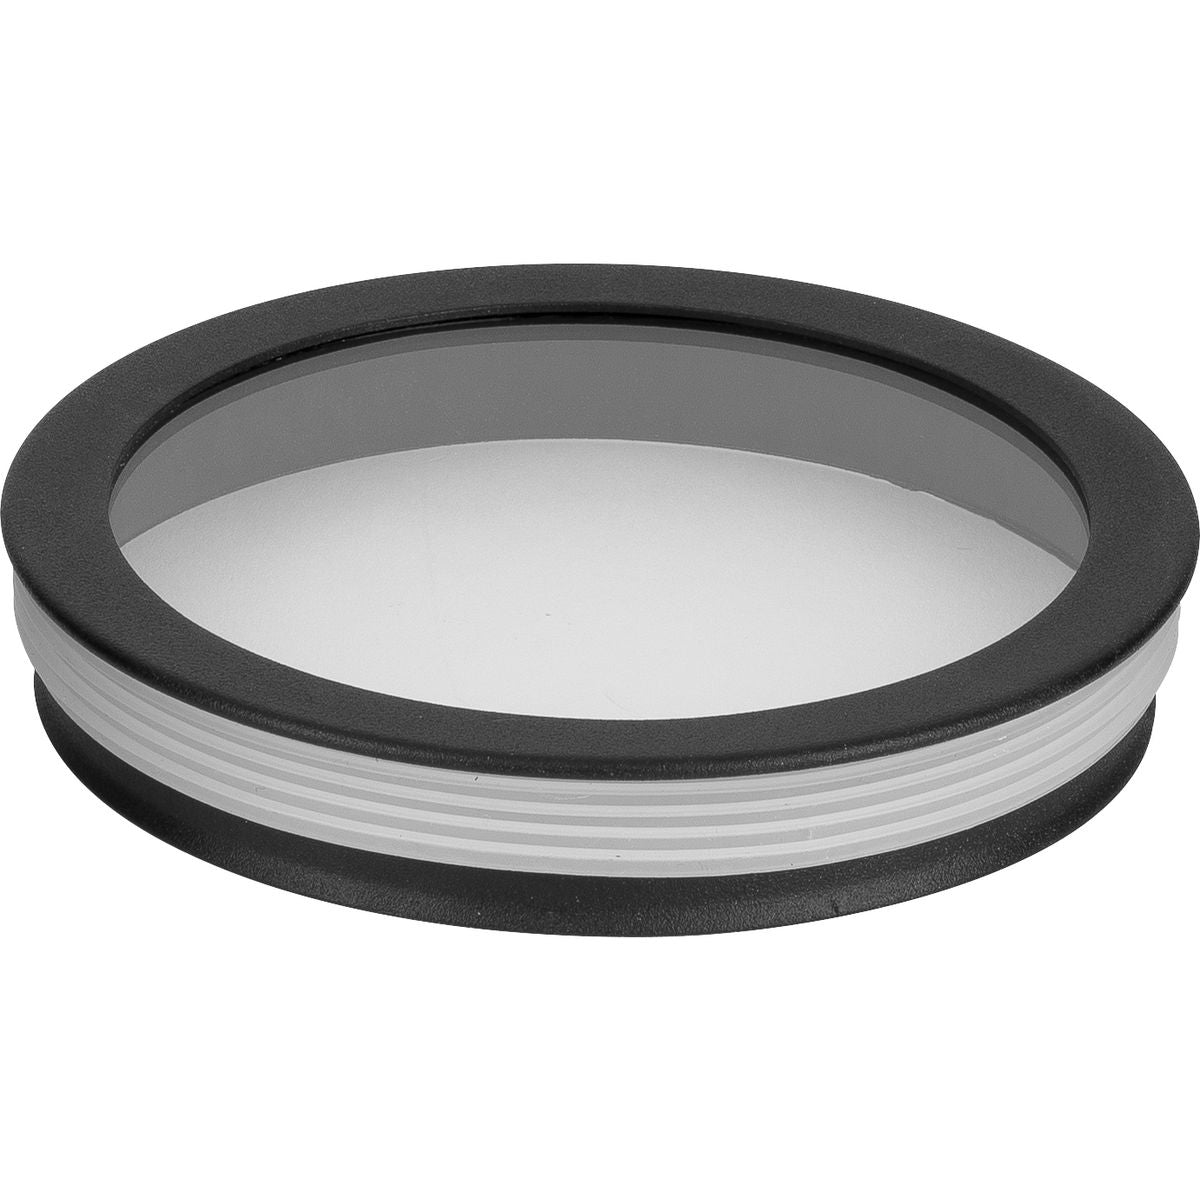 5" Round Cylinder Cover Lens